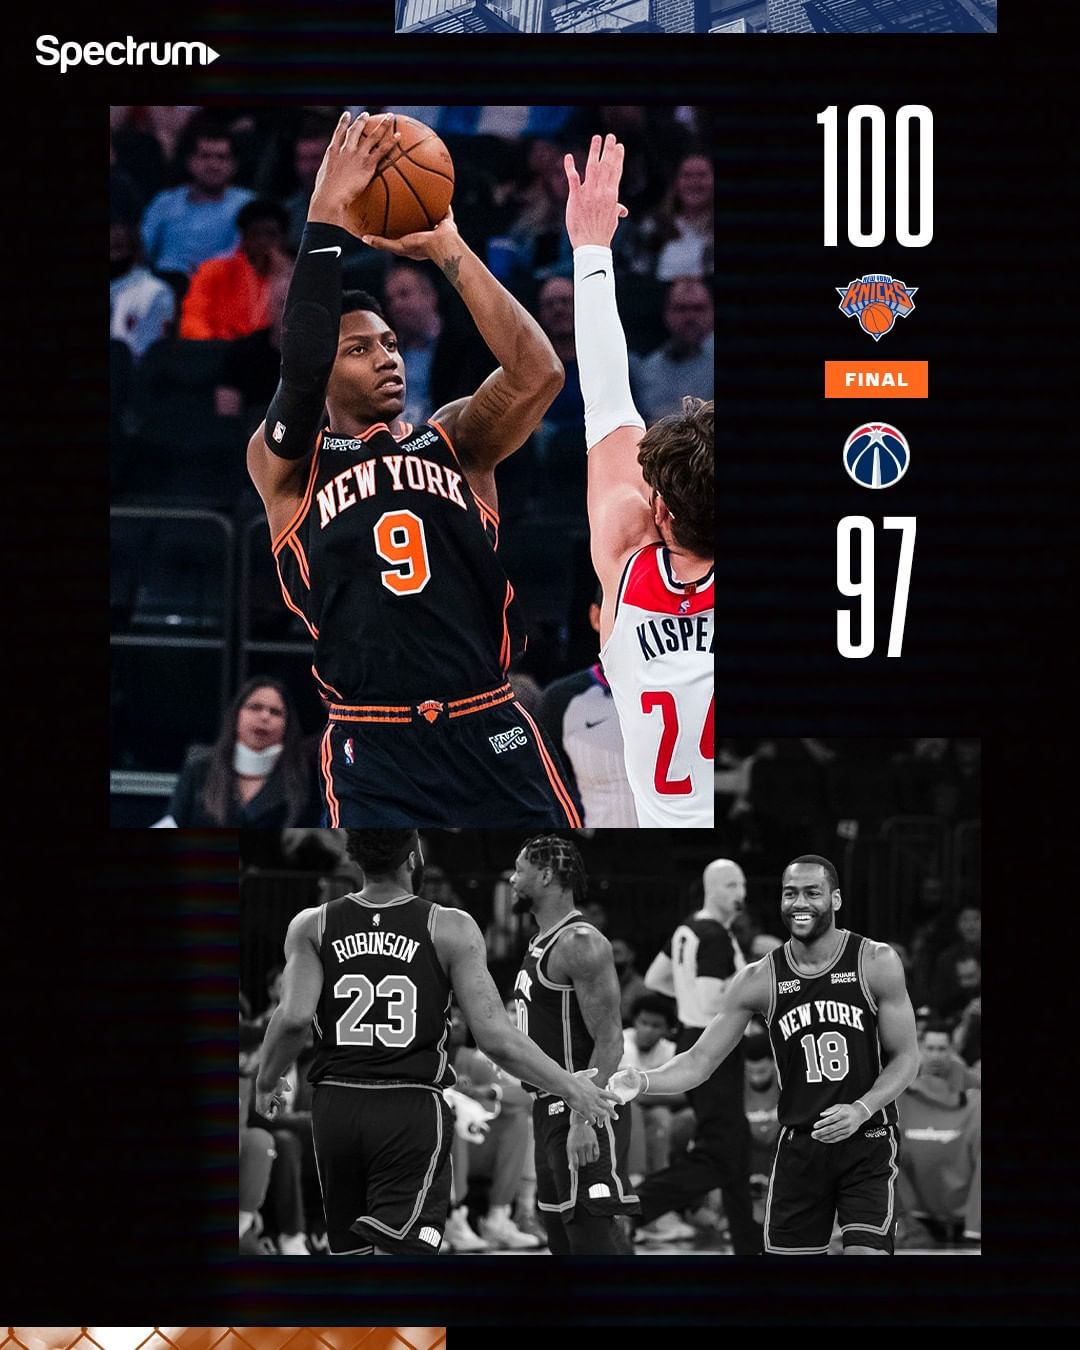 Held on for the W. See you Sunday! #NewYorkForever...